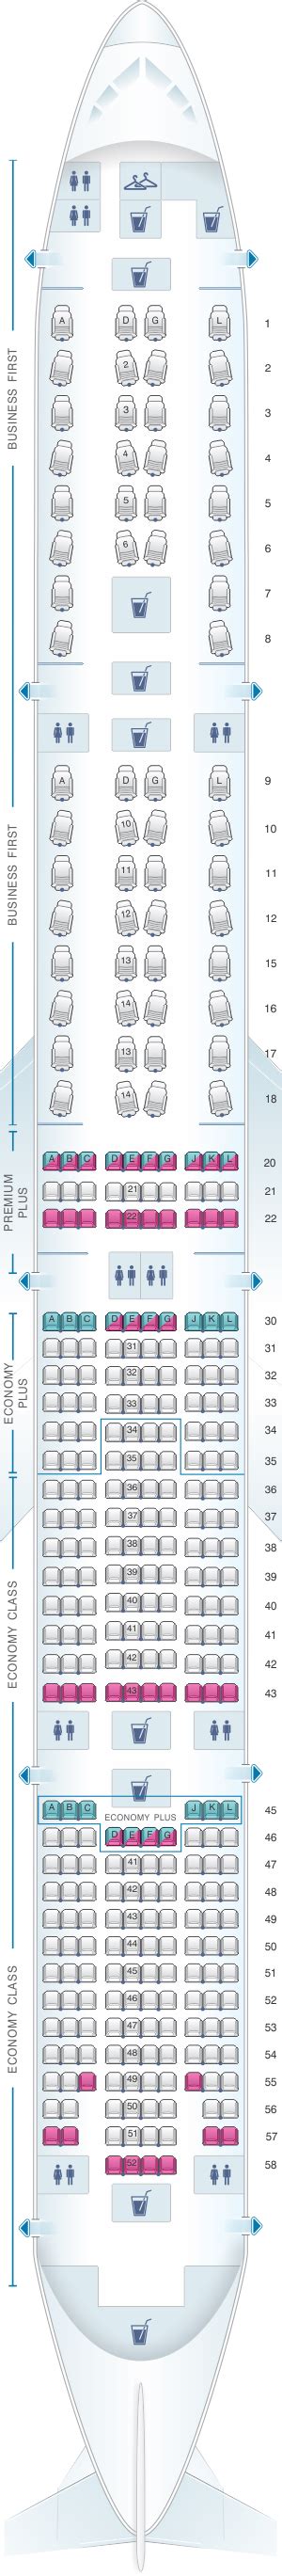 Boeing Seating Chart United Airlines Hot Sex Picture